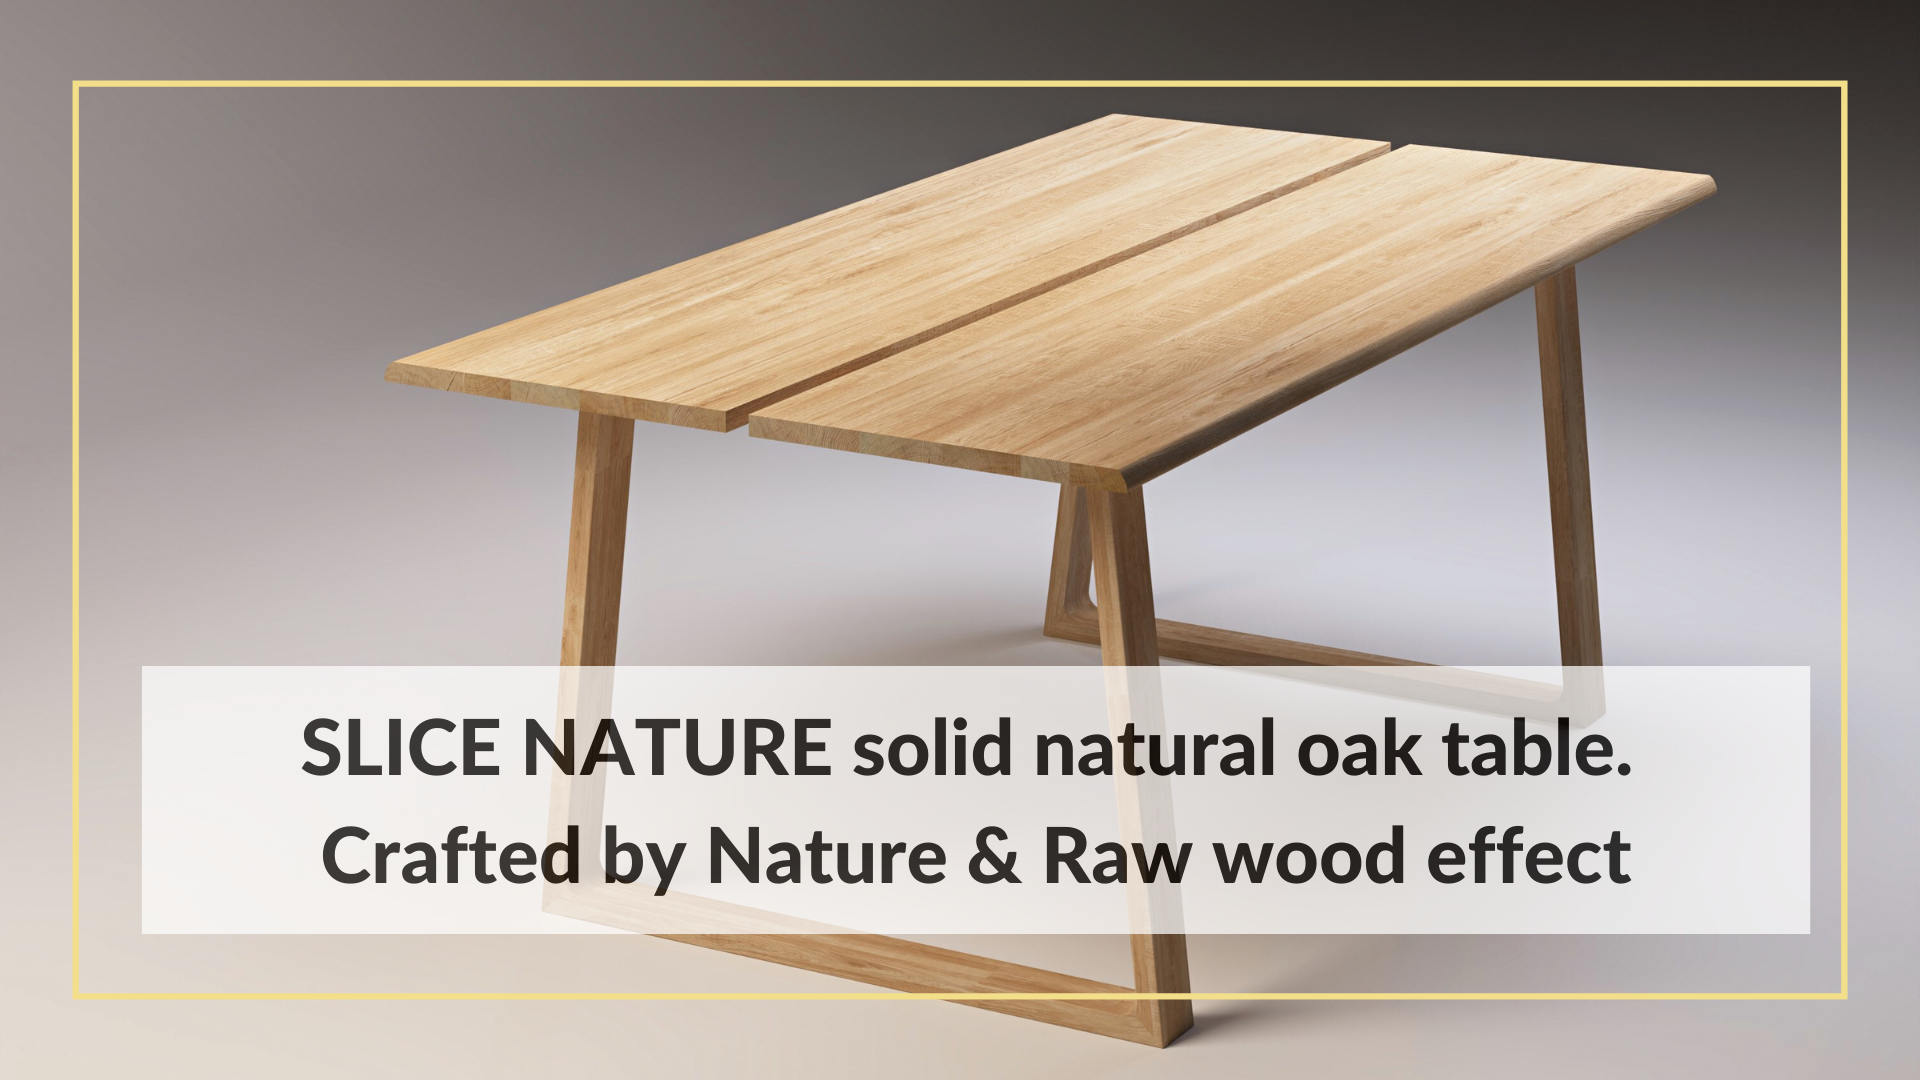 SLICE NATURE solid natural oak table. Crafted by Nature & Raw Wood Effect